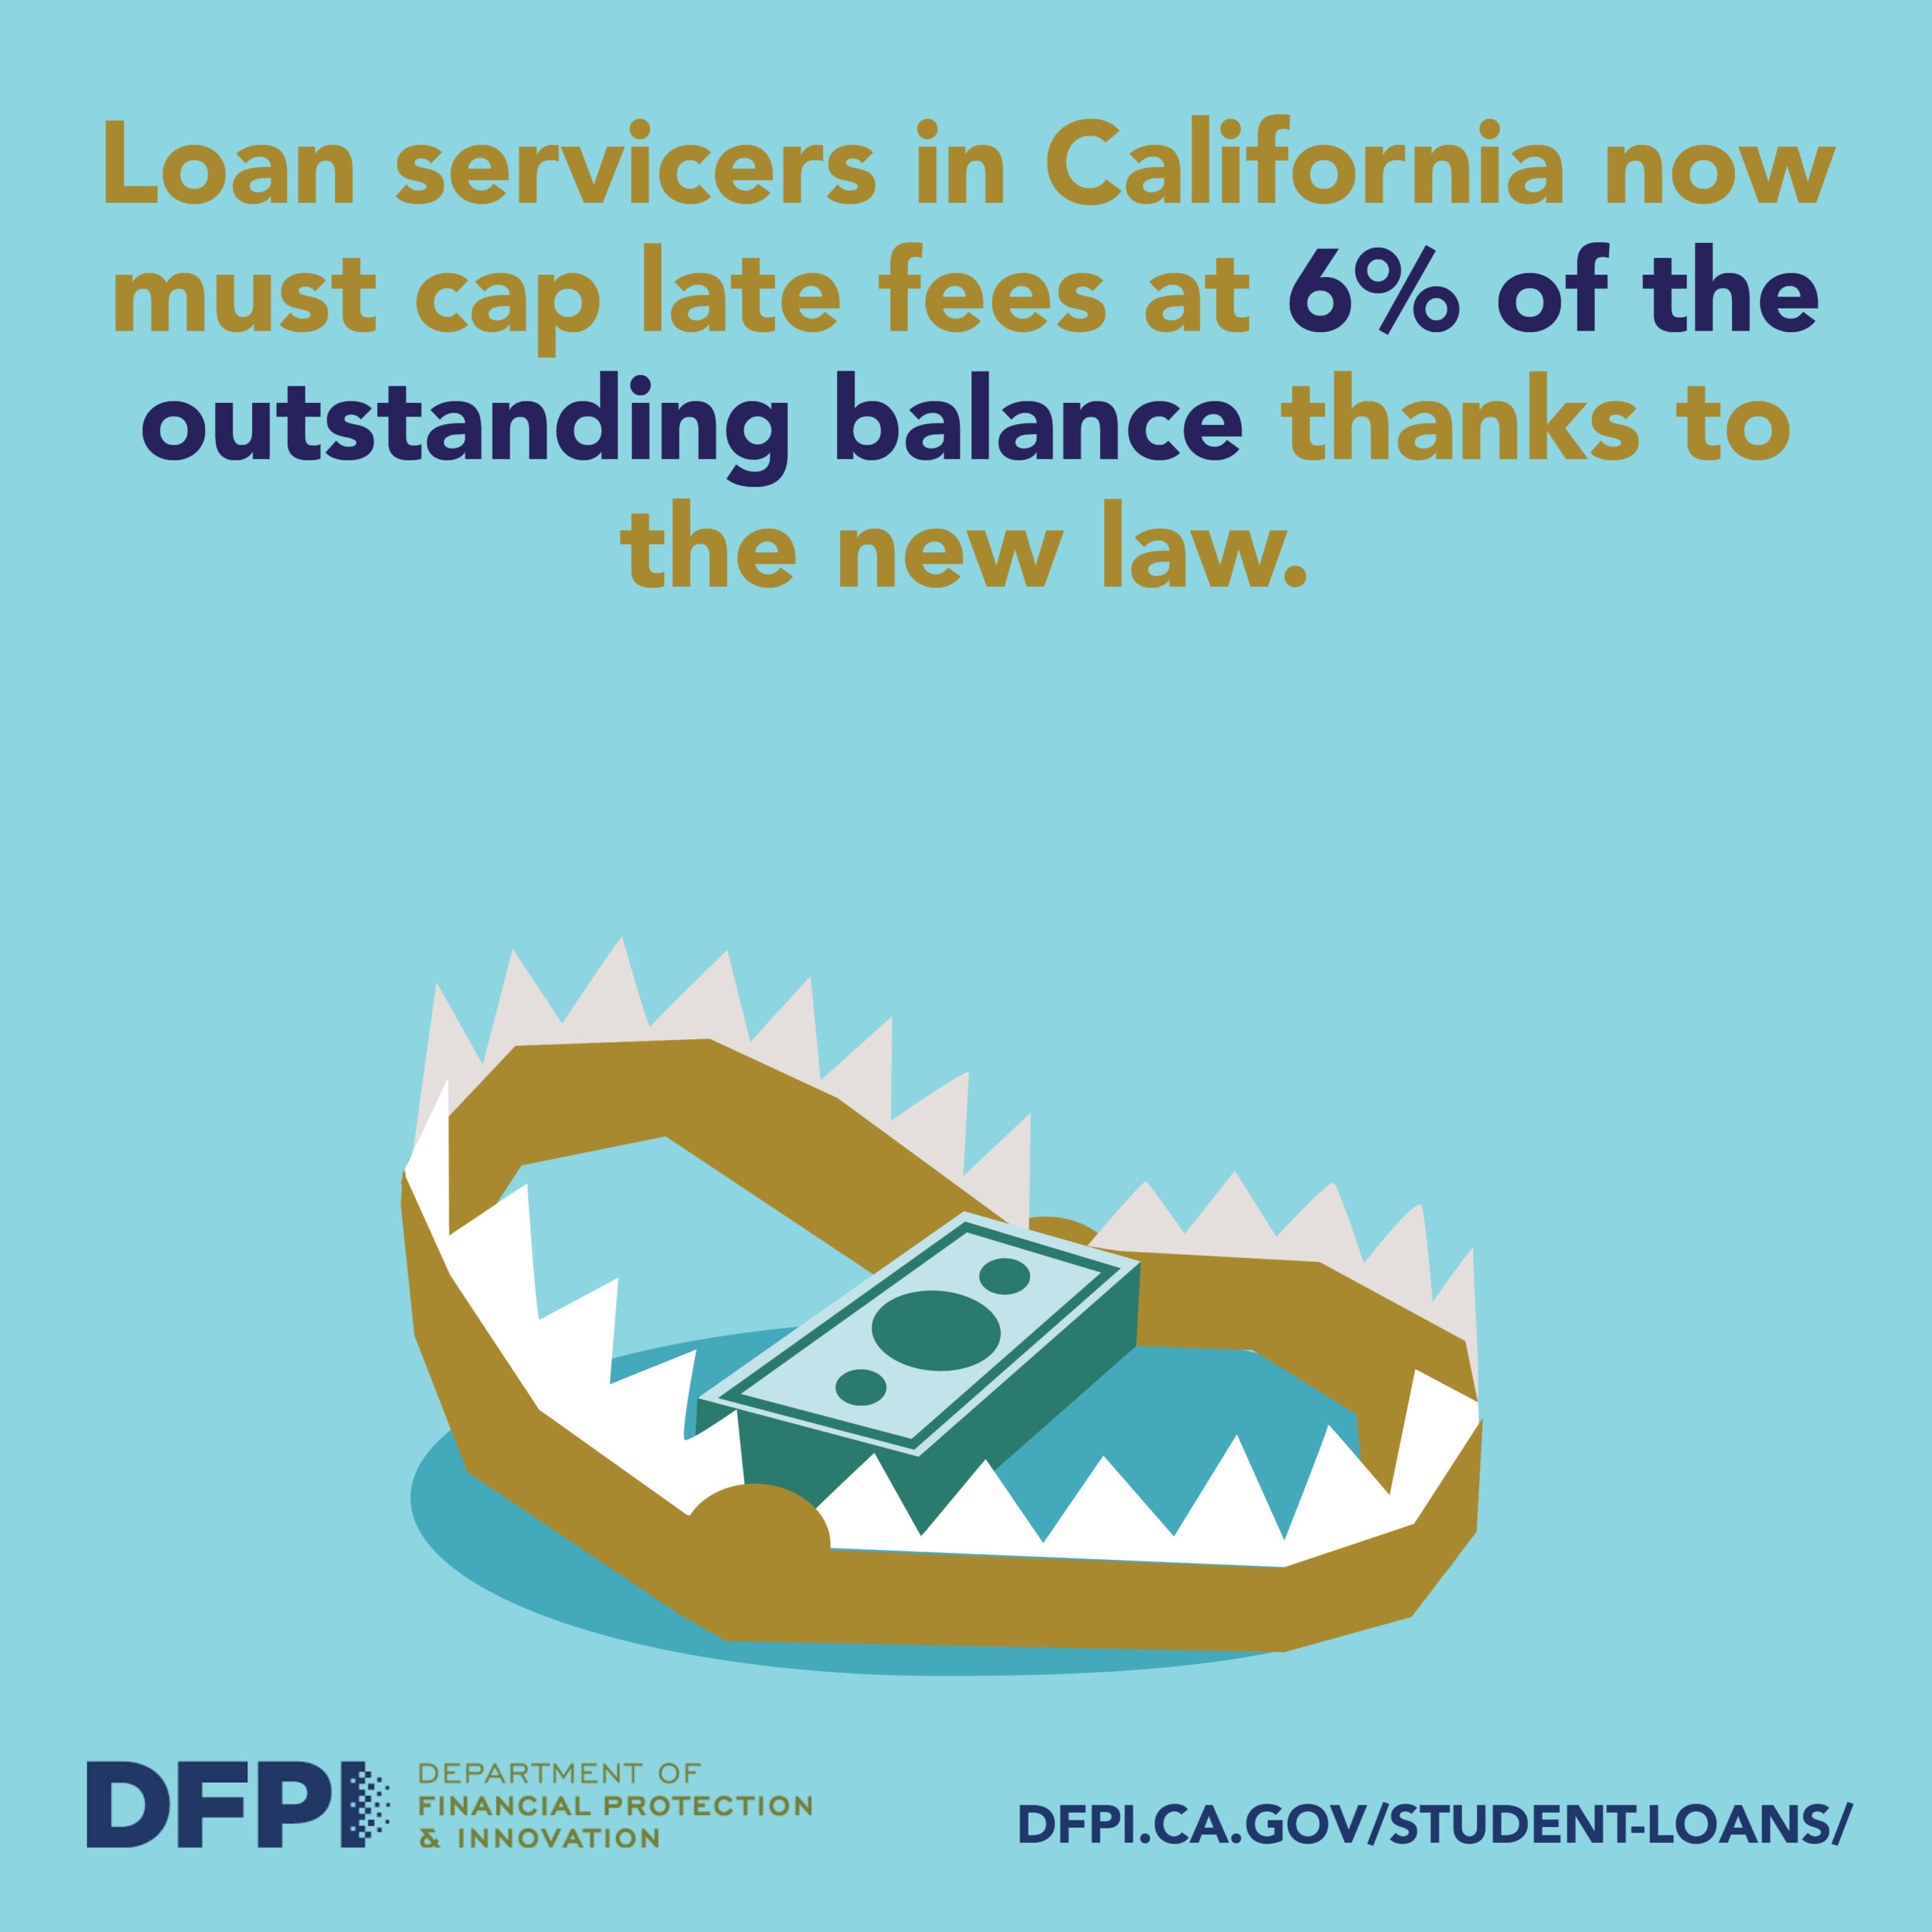 Loan servicers in California must cap late fees at 6%